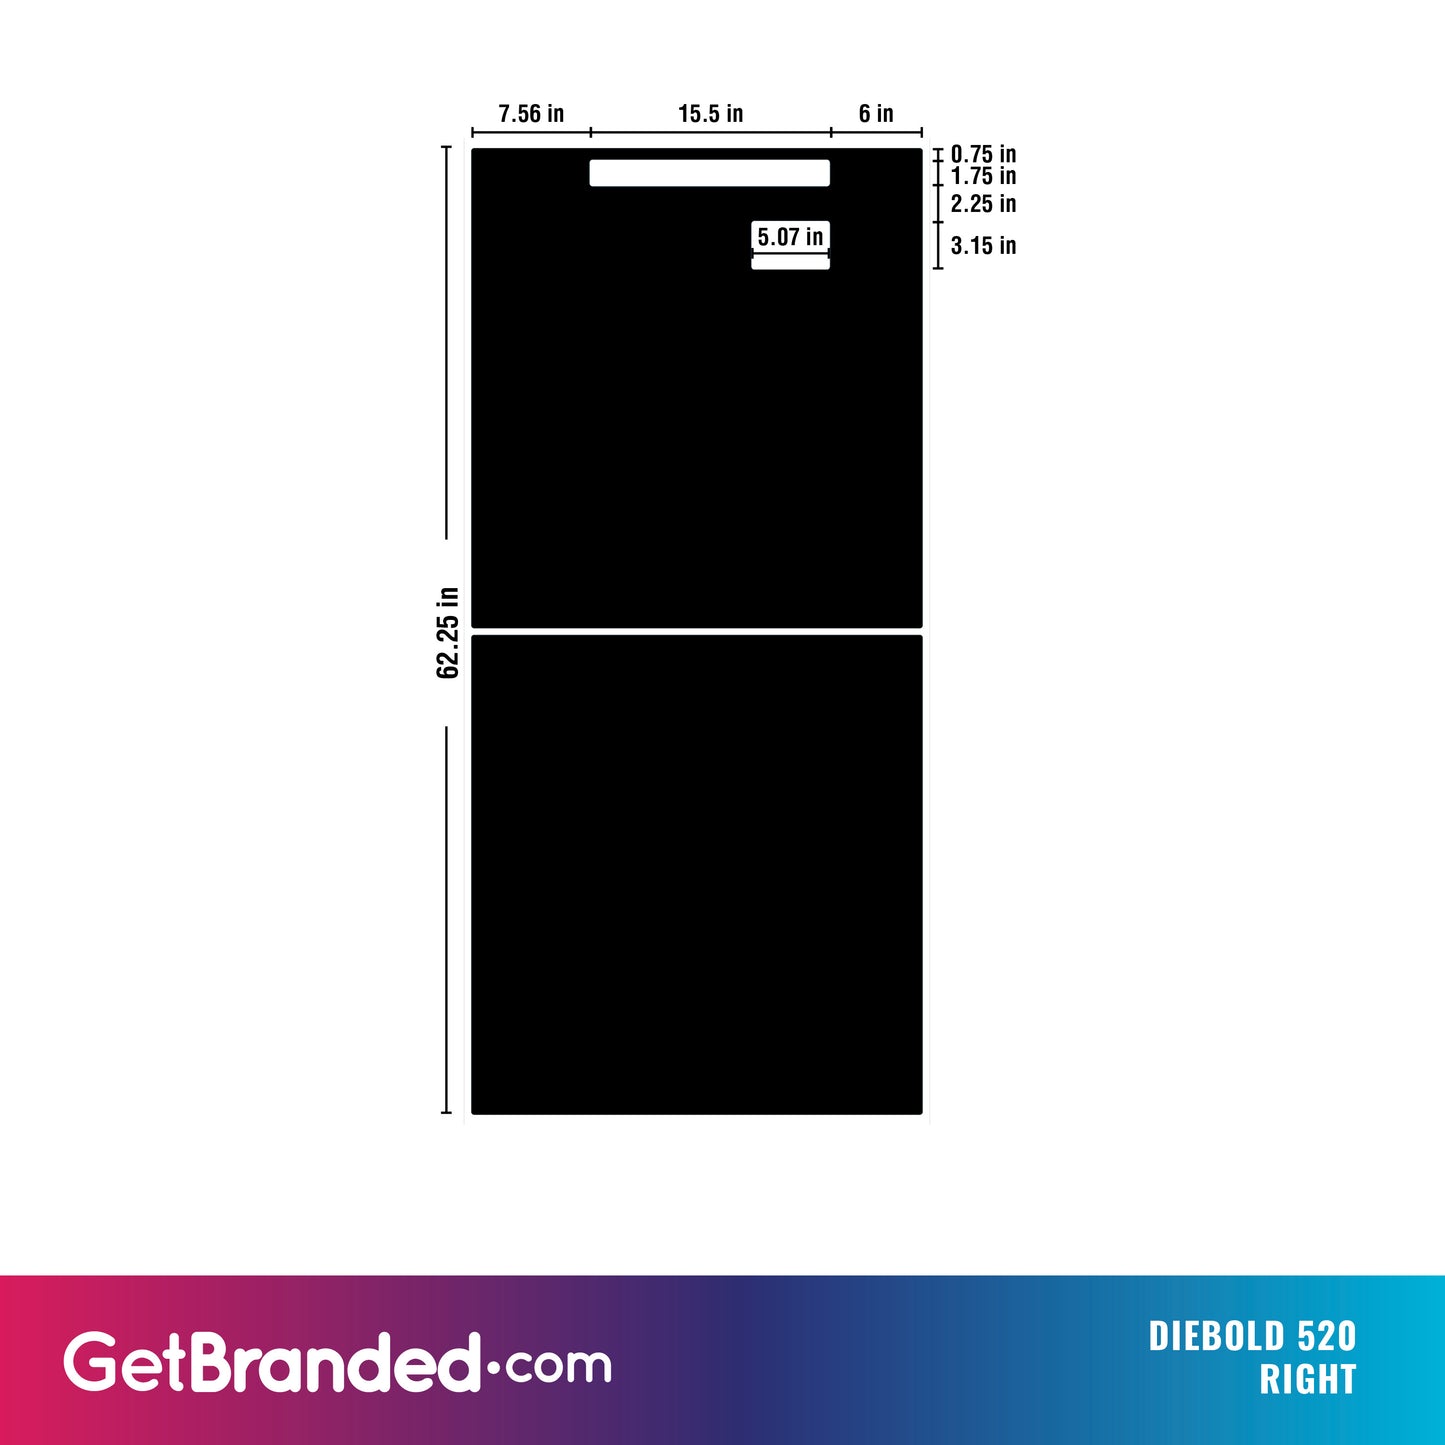 Diebold 520 right panel dimensions